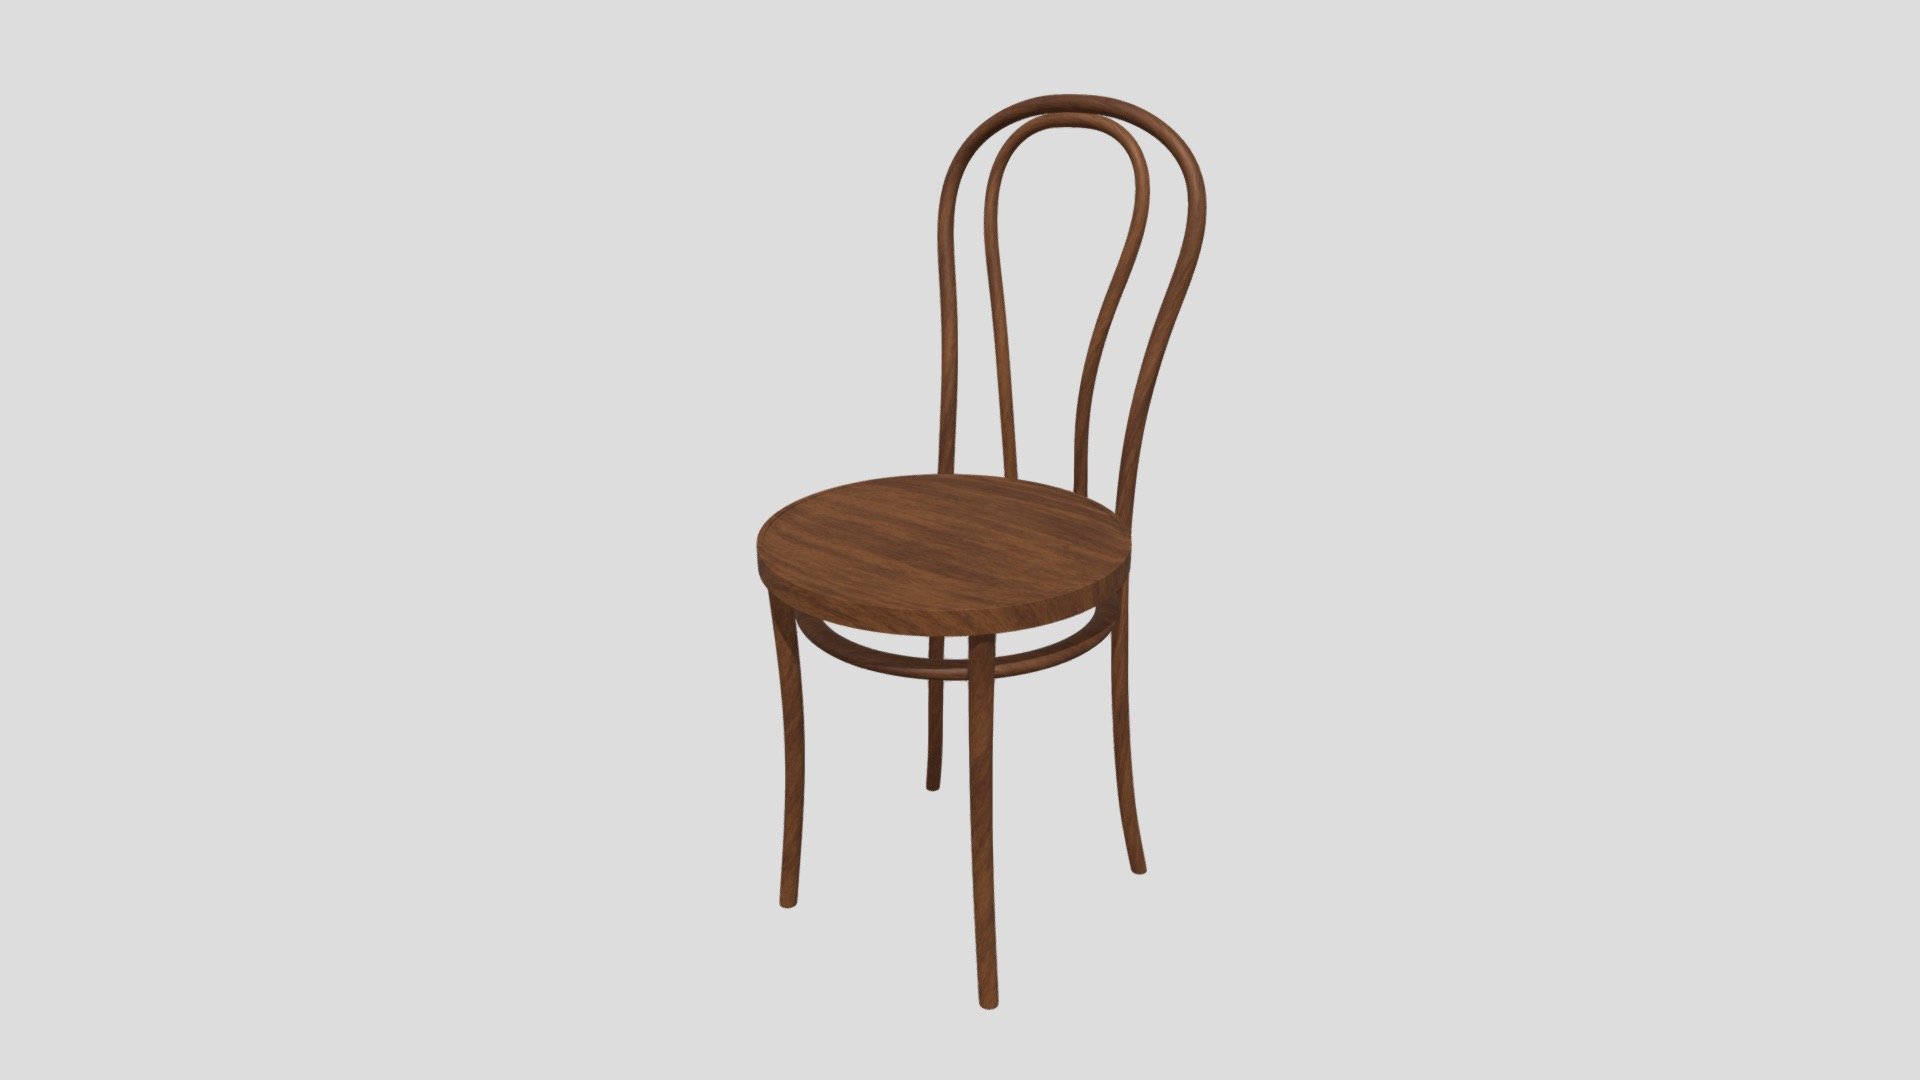 Textures: 2048 x 2048, One color on texture: brown colors.

Has Normal Map: 2048 x 2048.

Materials: 1 - Vienna Dining Chair

Smooth shaded.

Non-Mirrored.

Subdivision Level: 1

Origin located on bottom-center.

Polygons: 26208

Vertices: 13114

Formats: Fbx, Obj, Stl, Dae.

I hope you enjoy the model! - Vienna Dining Chair - Buy Royalty Free 3D model by Ed+ (@EDplus) 3d model